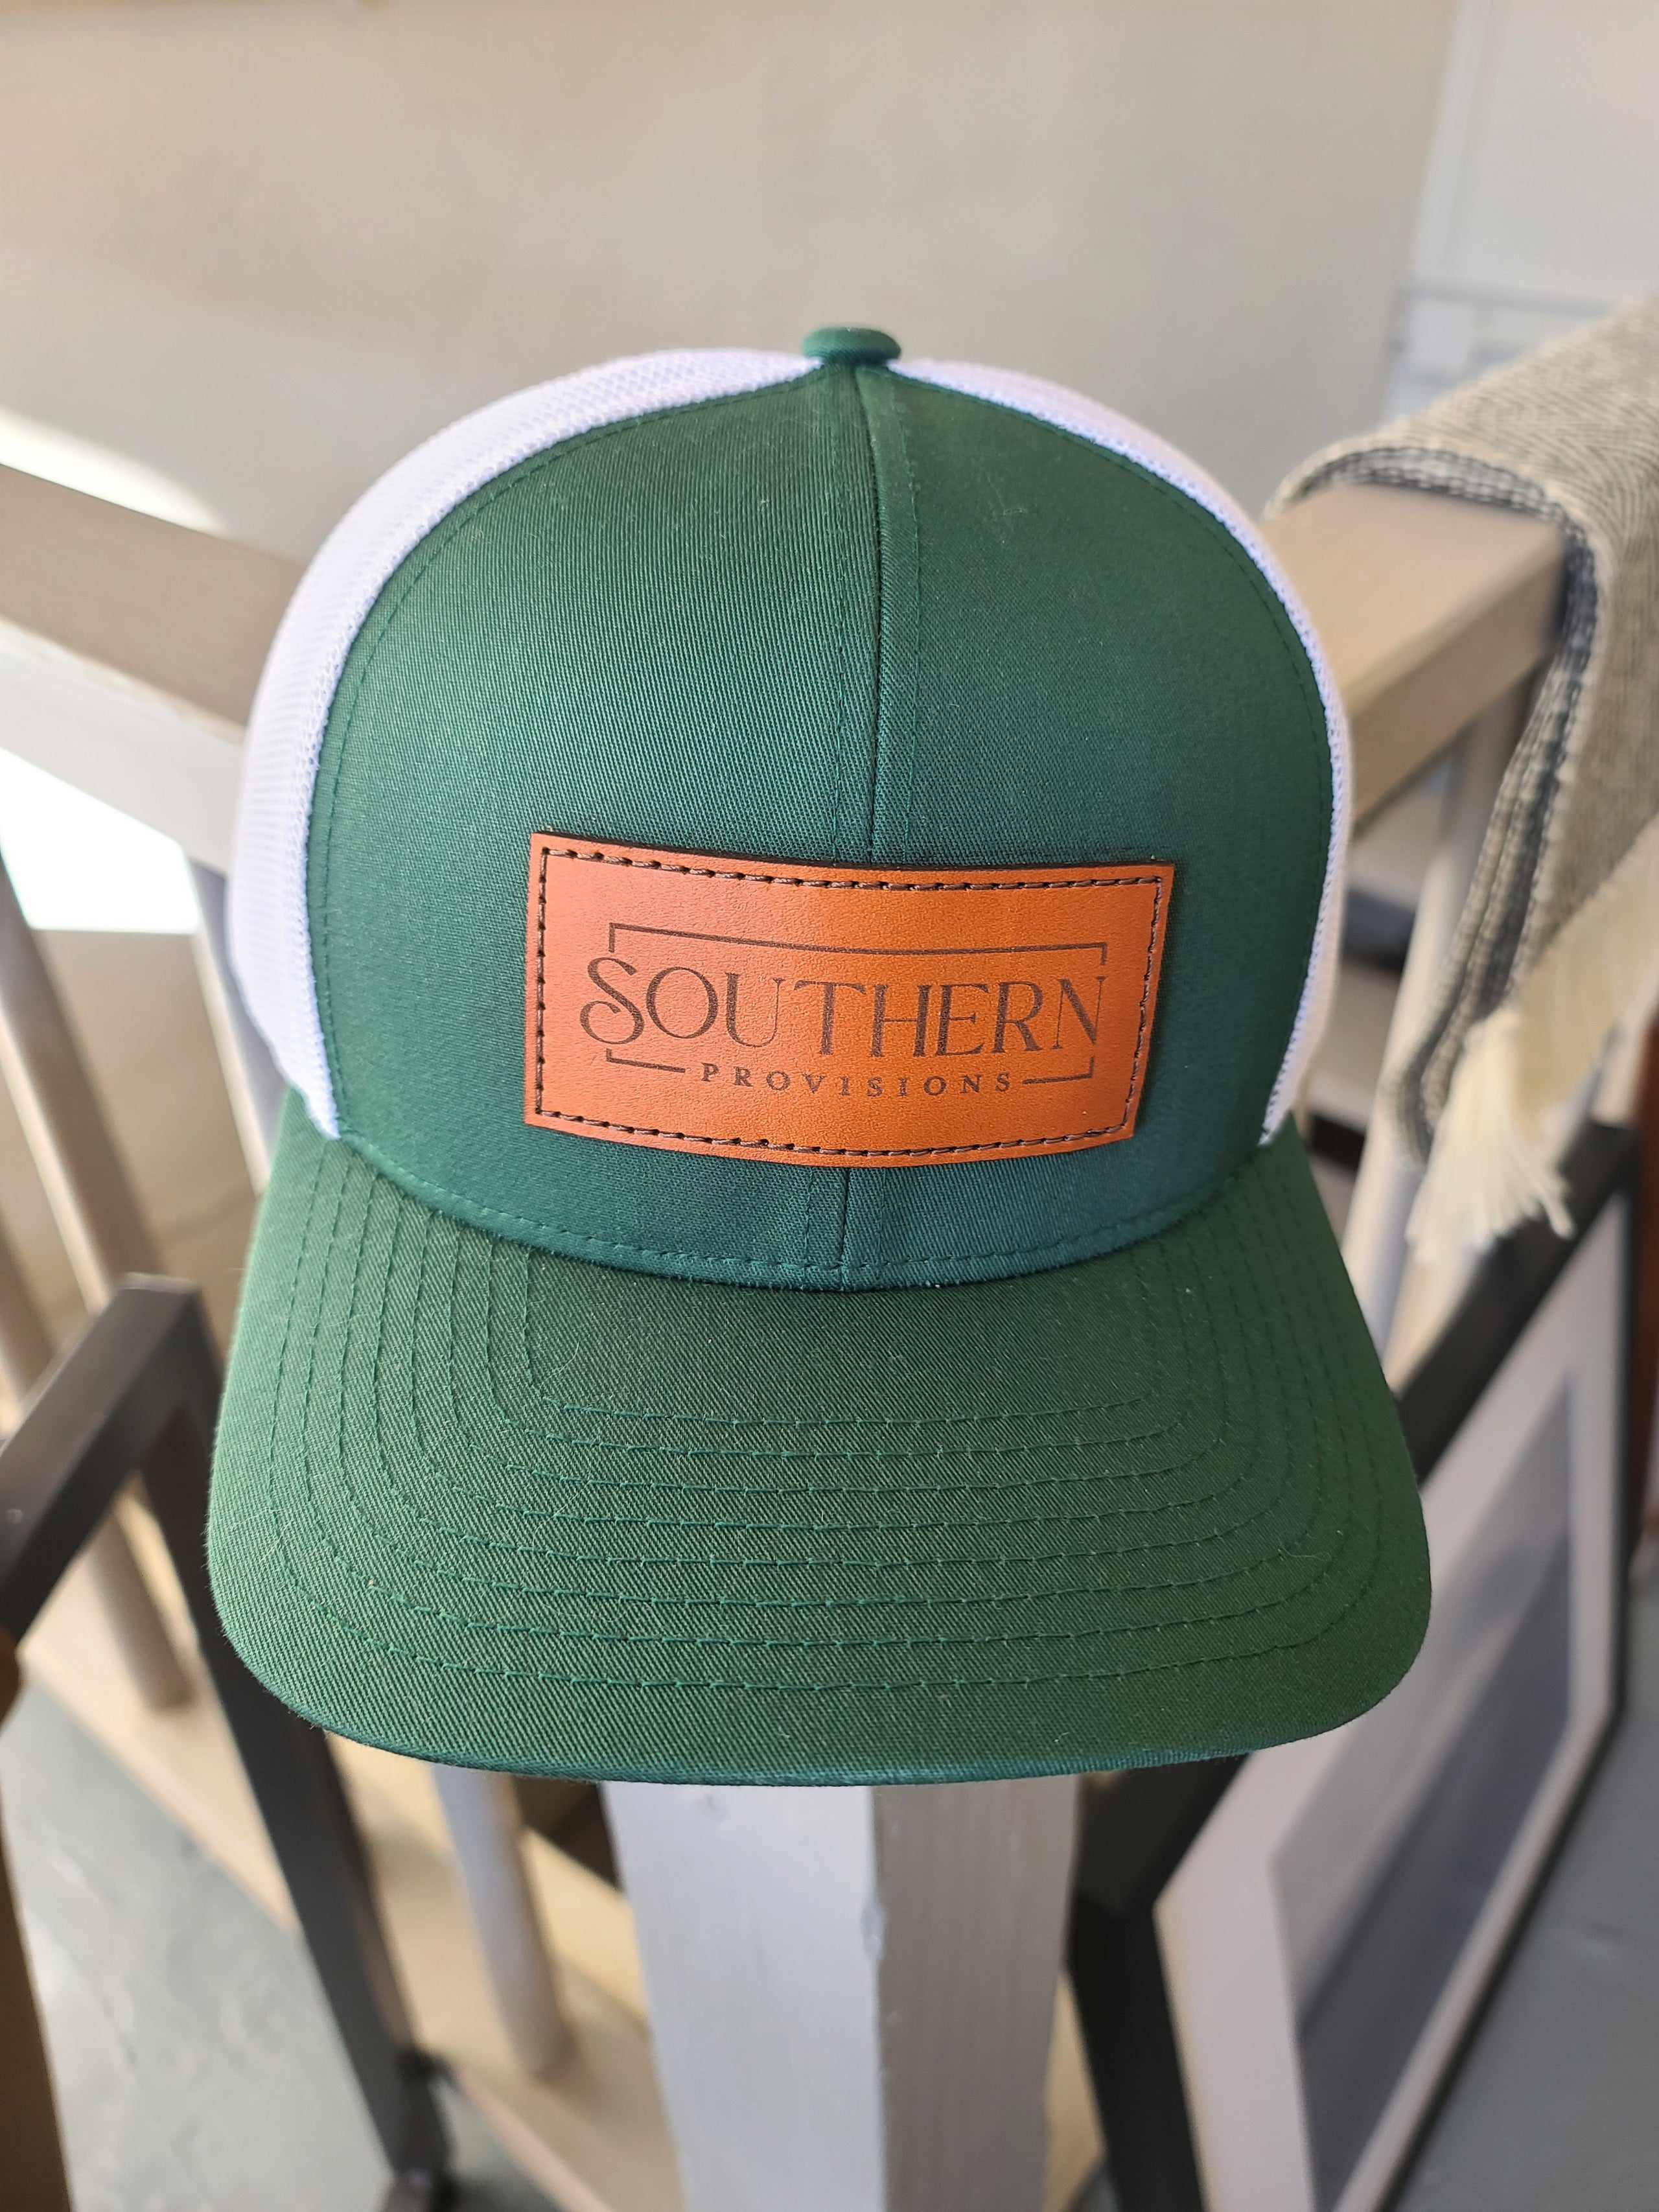 Southern Provisions Men's Trucker Hat